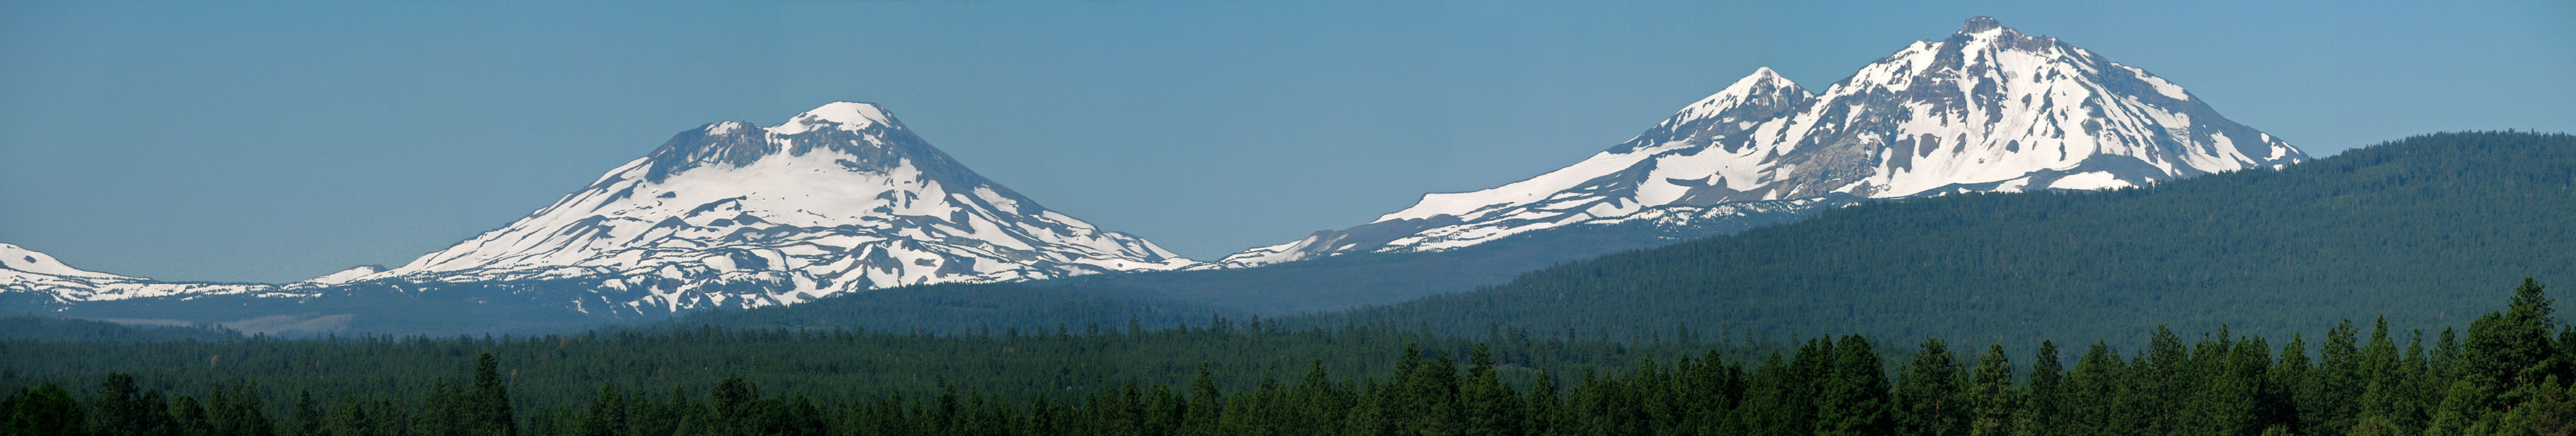 Three Sisters panorama, morning [Highway 242, Sisters, Deschutes County, Oregon]